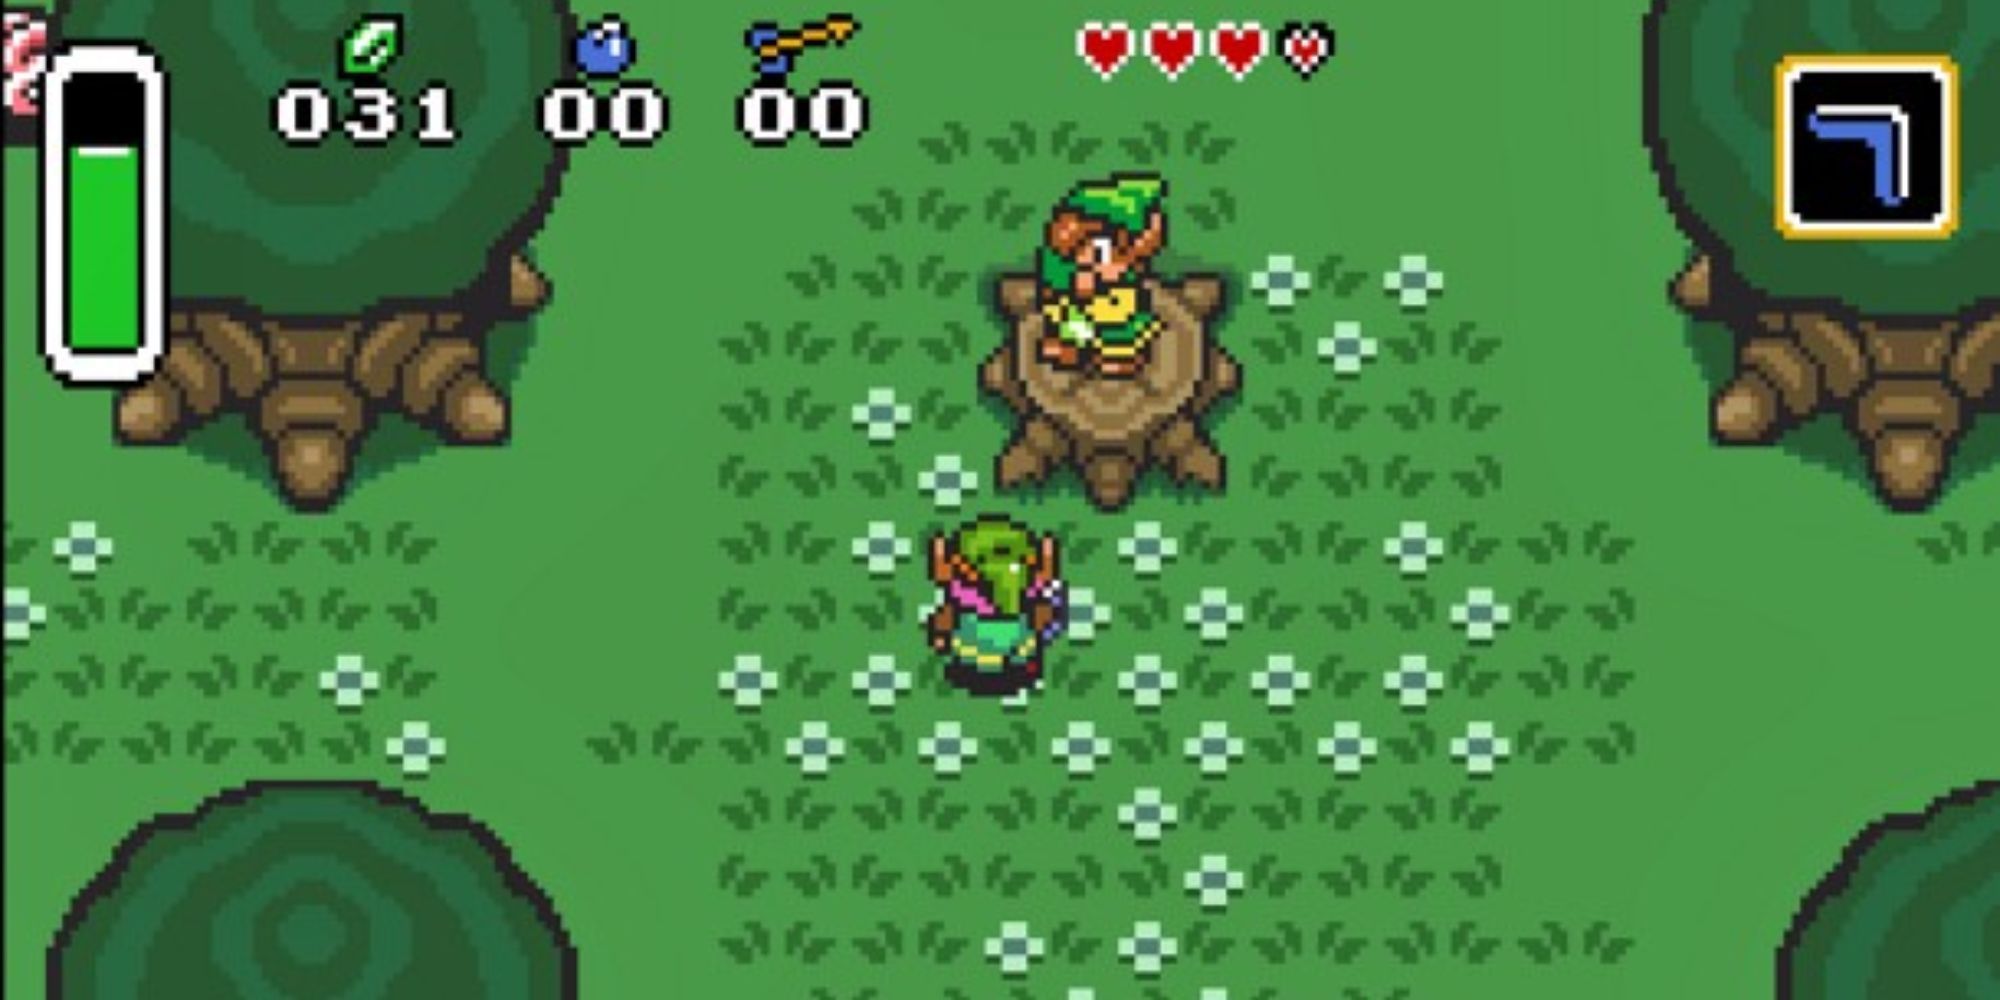 Link Standing By Flute Boy On Tree Stump In Woods